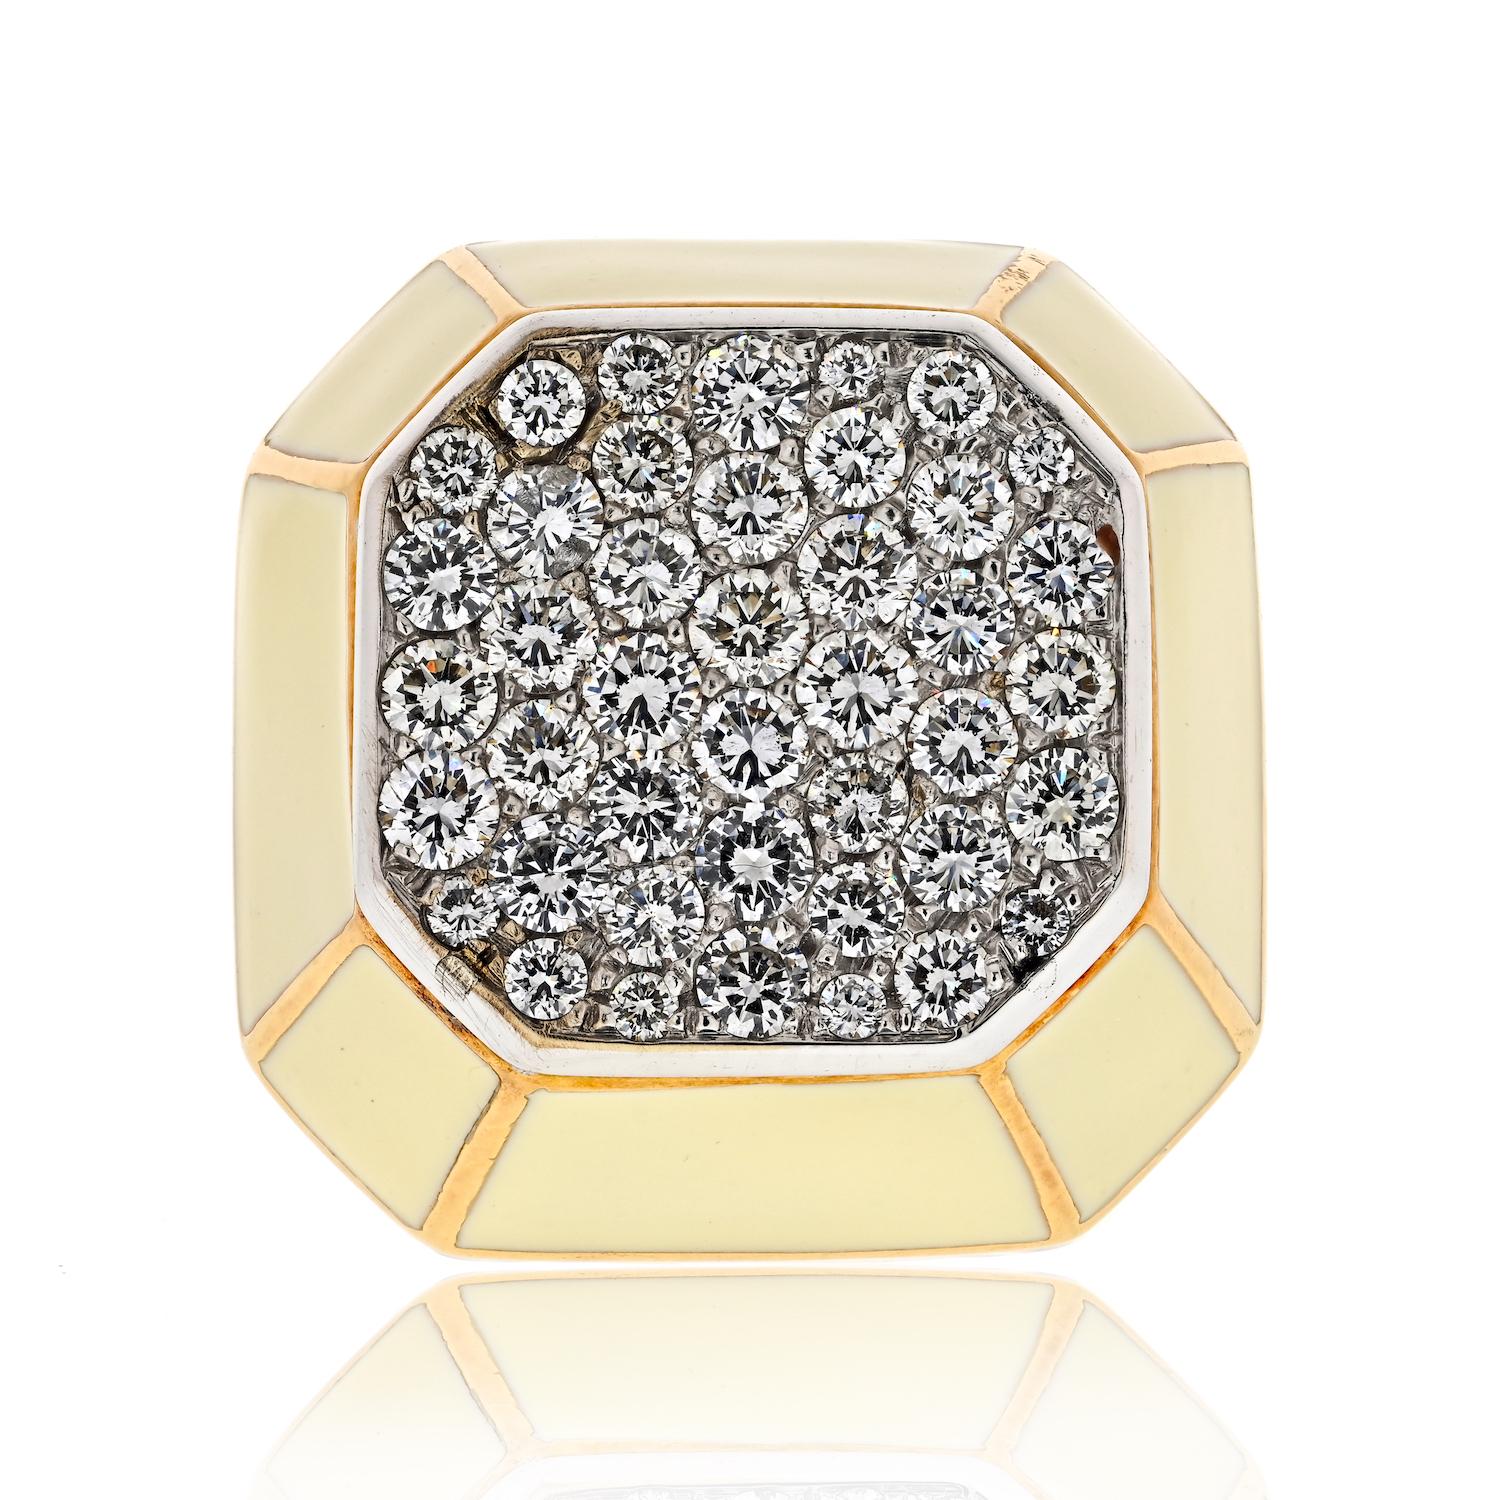 Elevate your style with this captivating David Webb Platinum & 18K Yellow Gold Diamond Octagon Cluster Cocktail Cream Enamel Ring. 

The exquisite ring top measures 27mm, with the diamond surface spanning an impressive 20mm, creating a dazzling